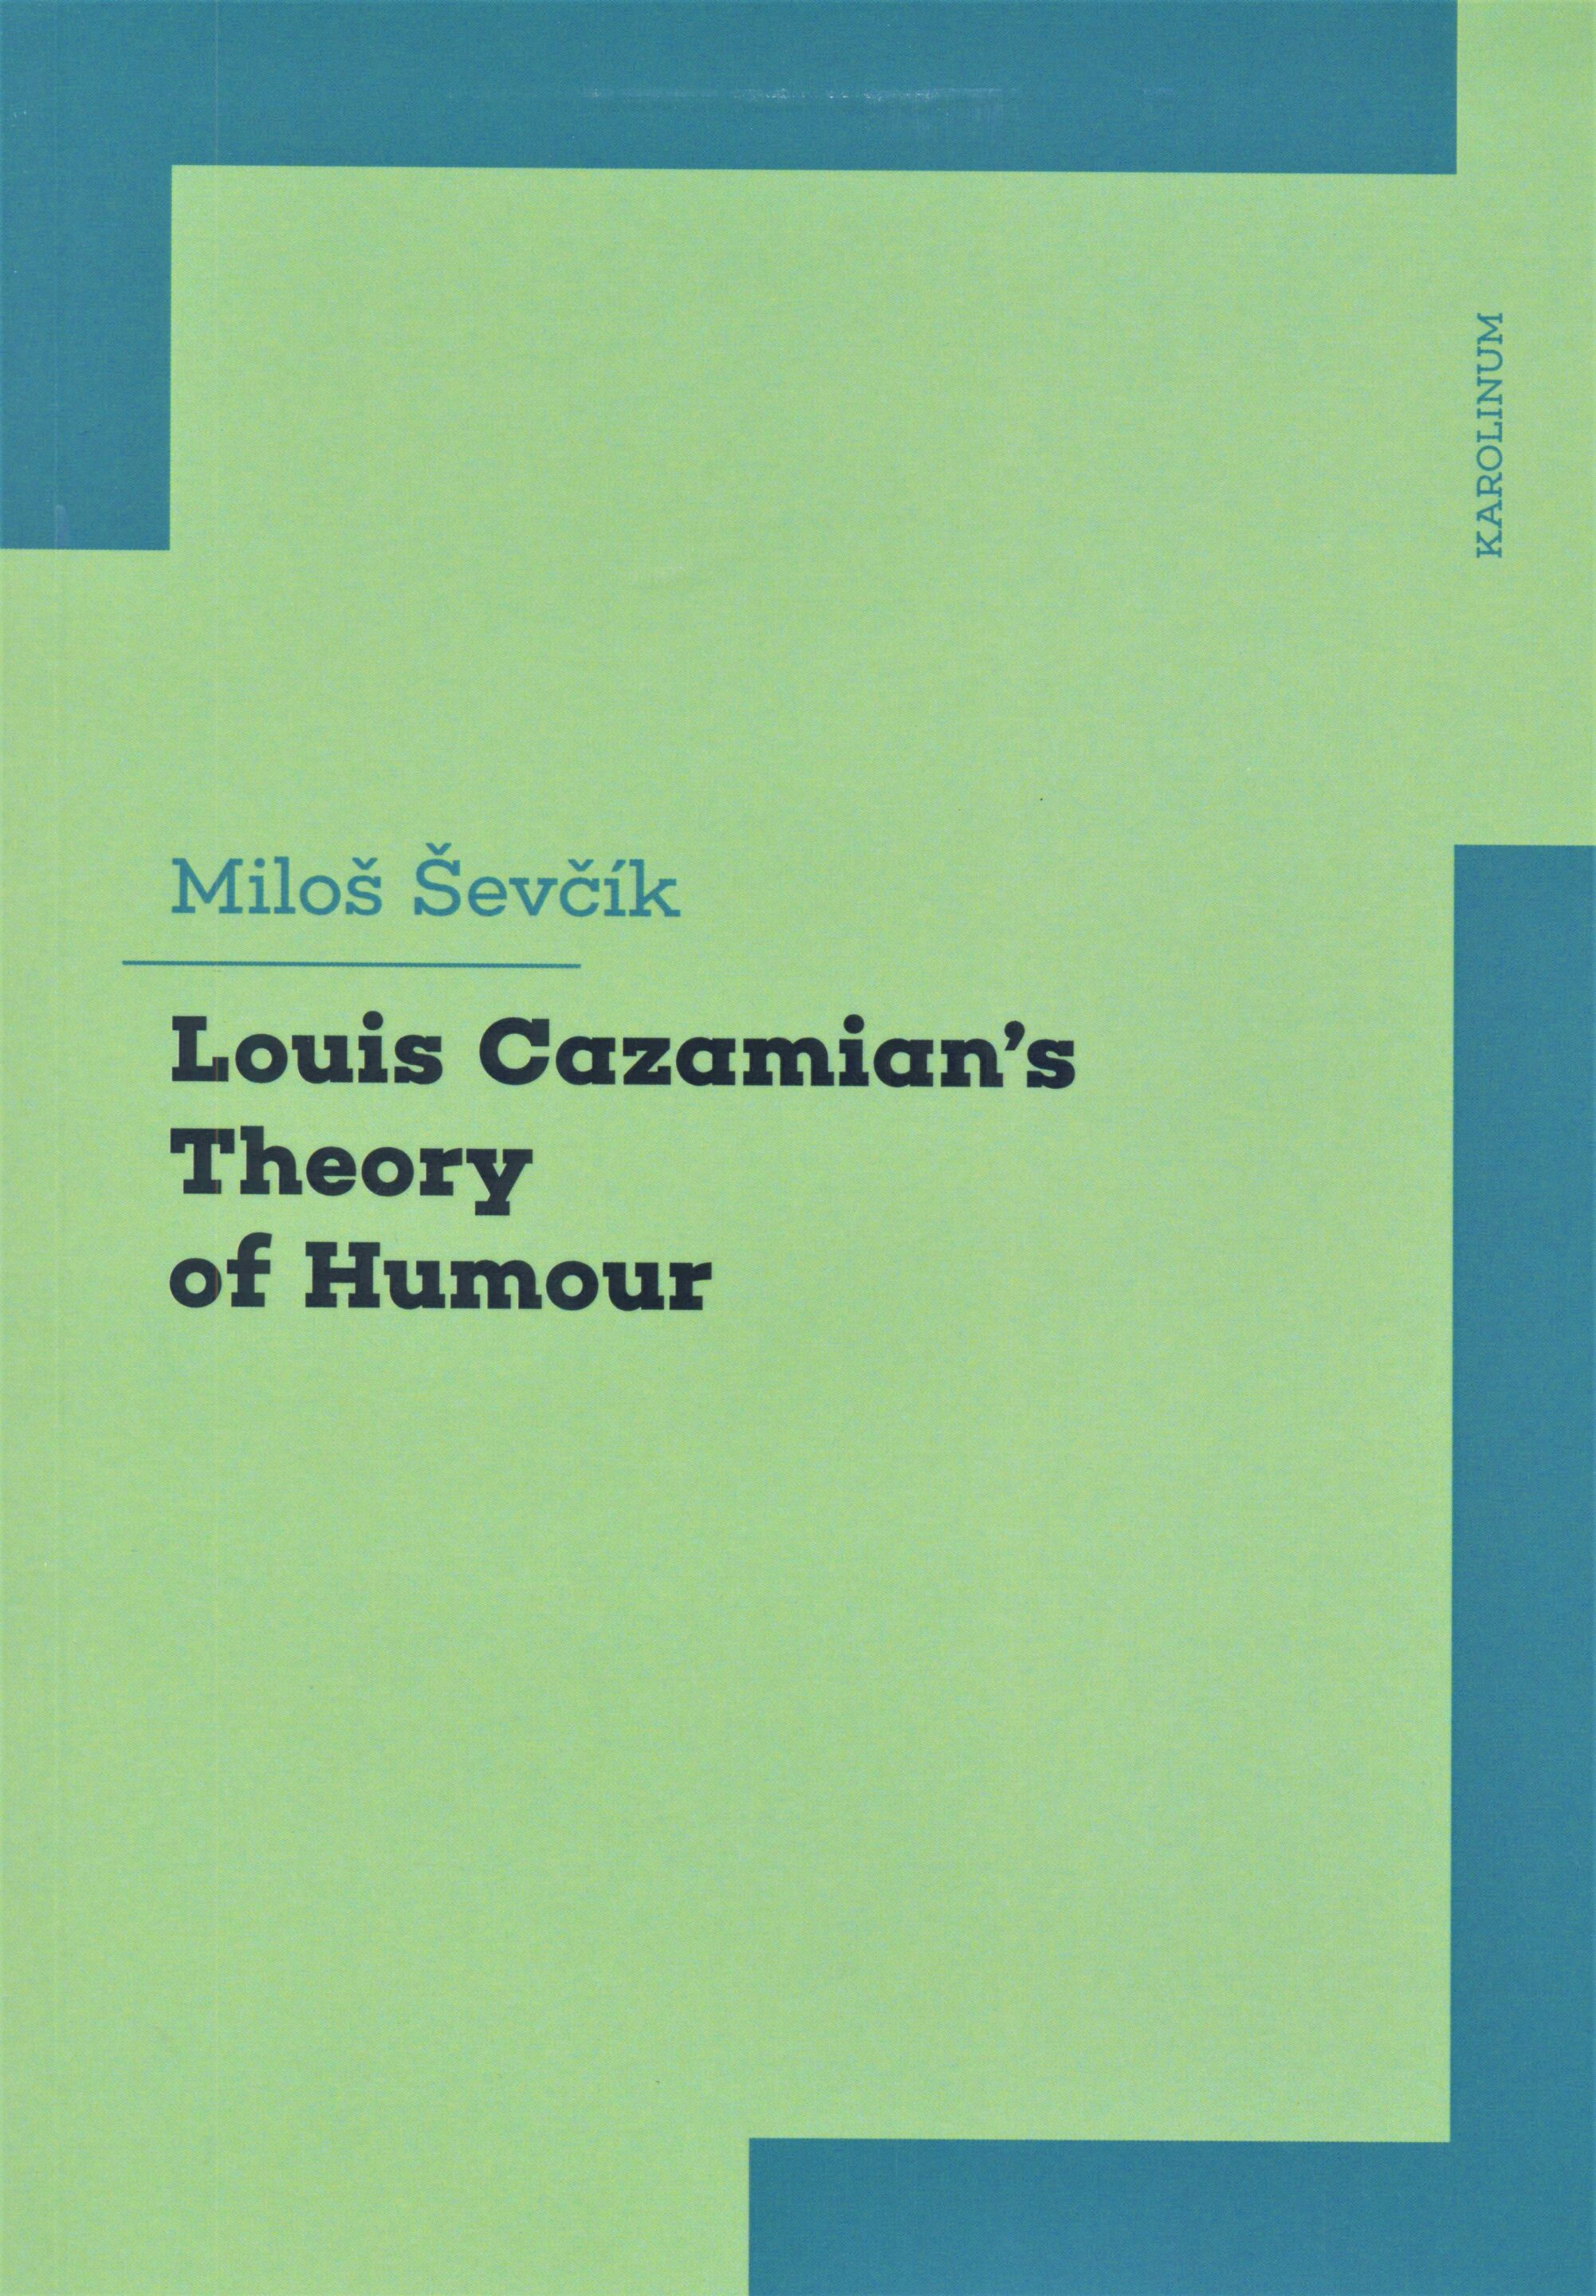 Louis Cazamian's Theory of Humour